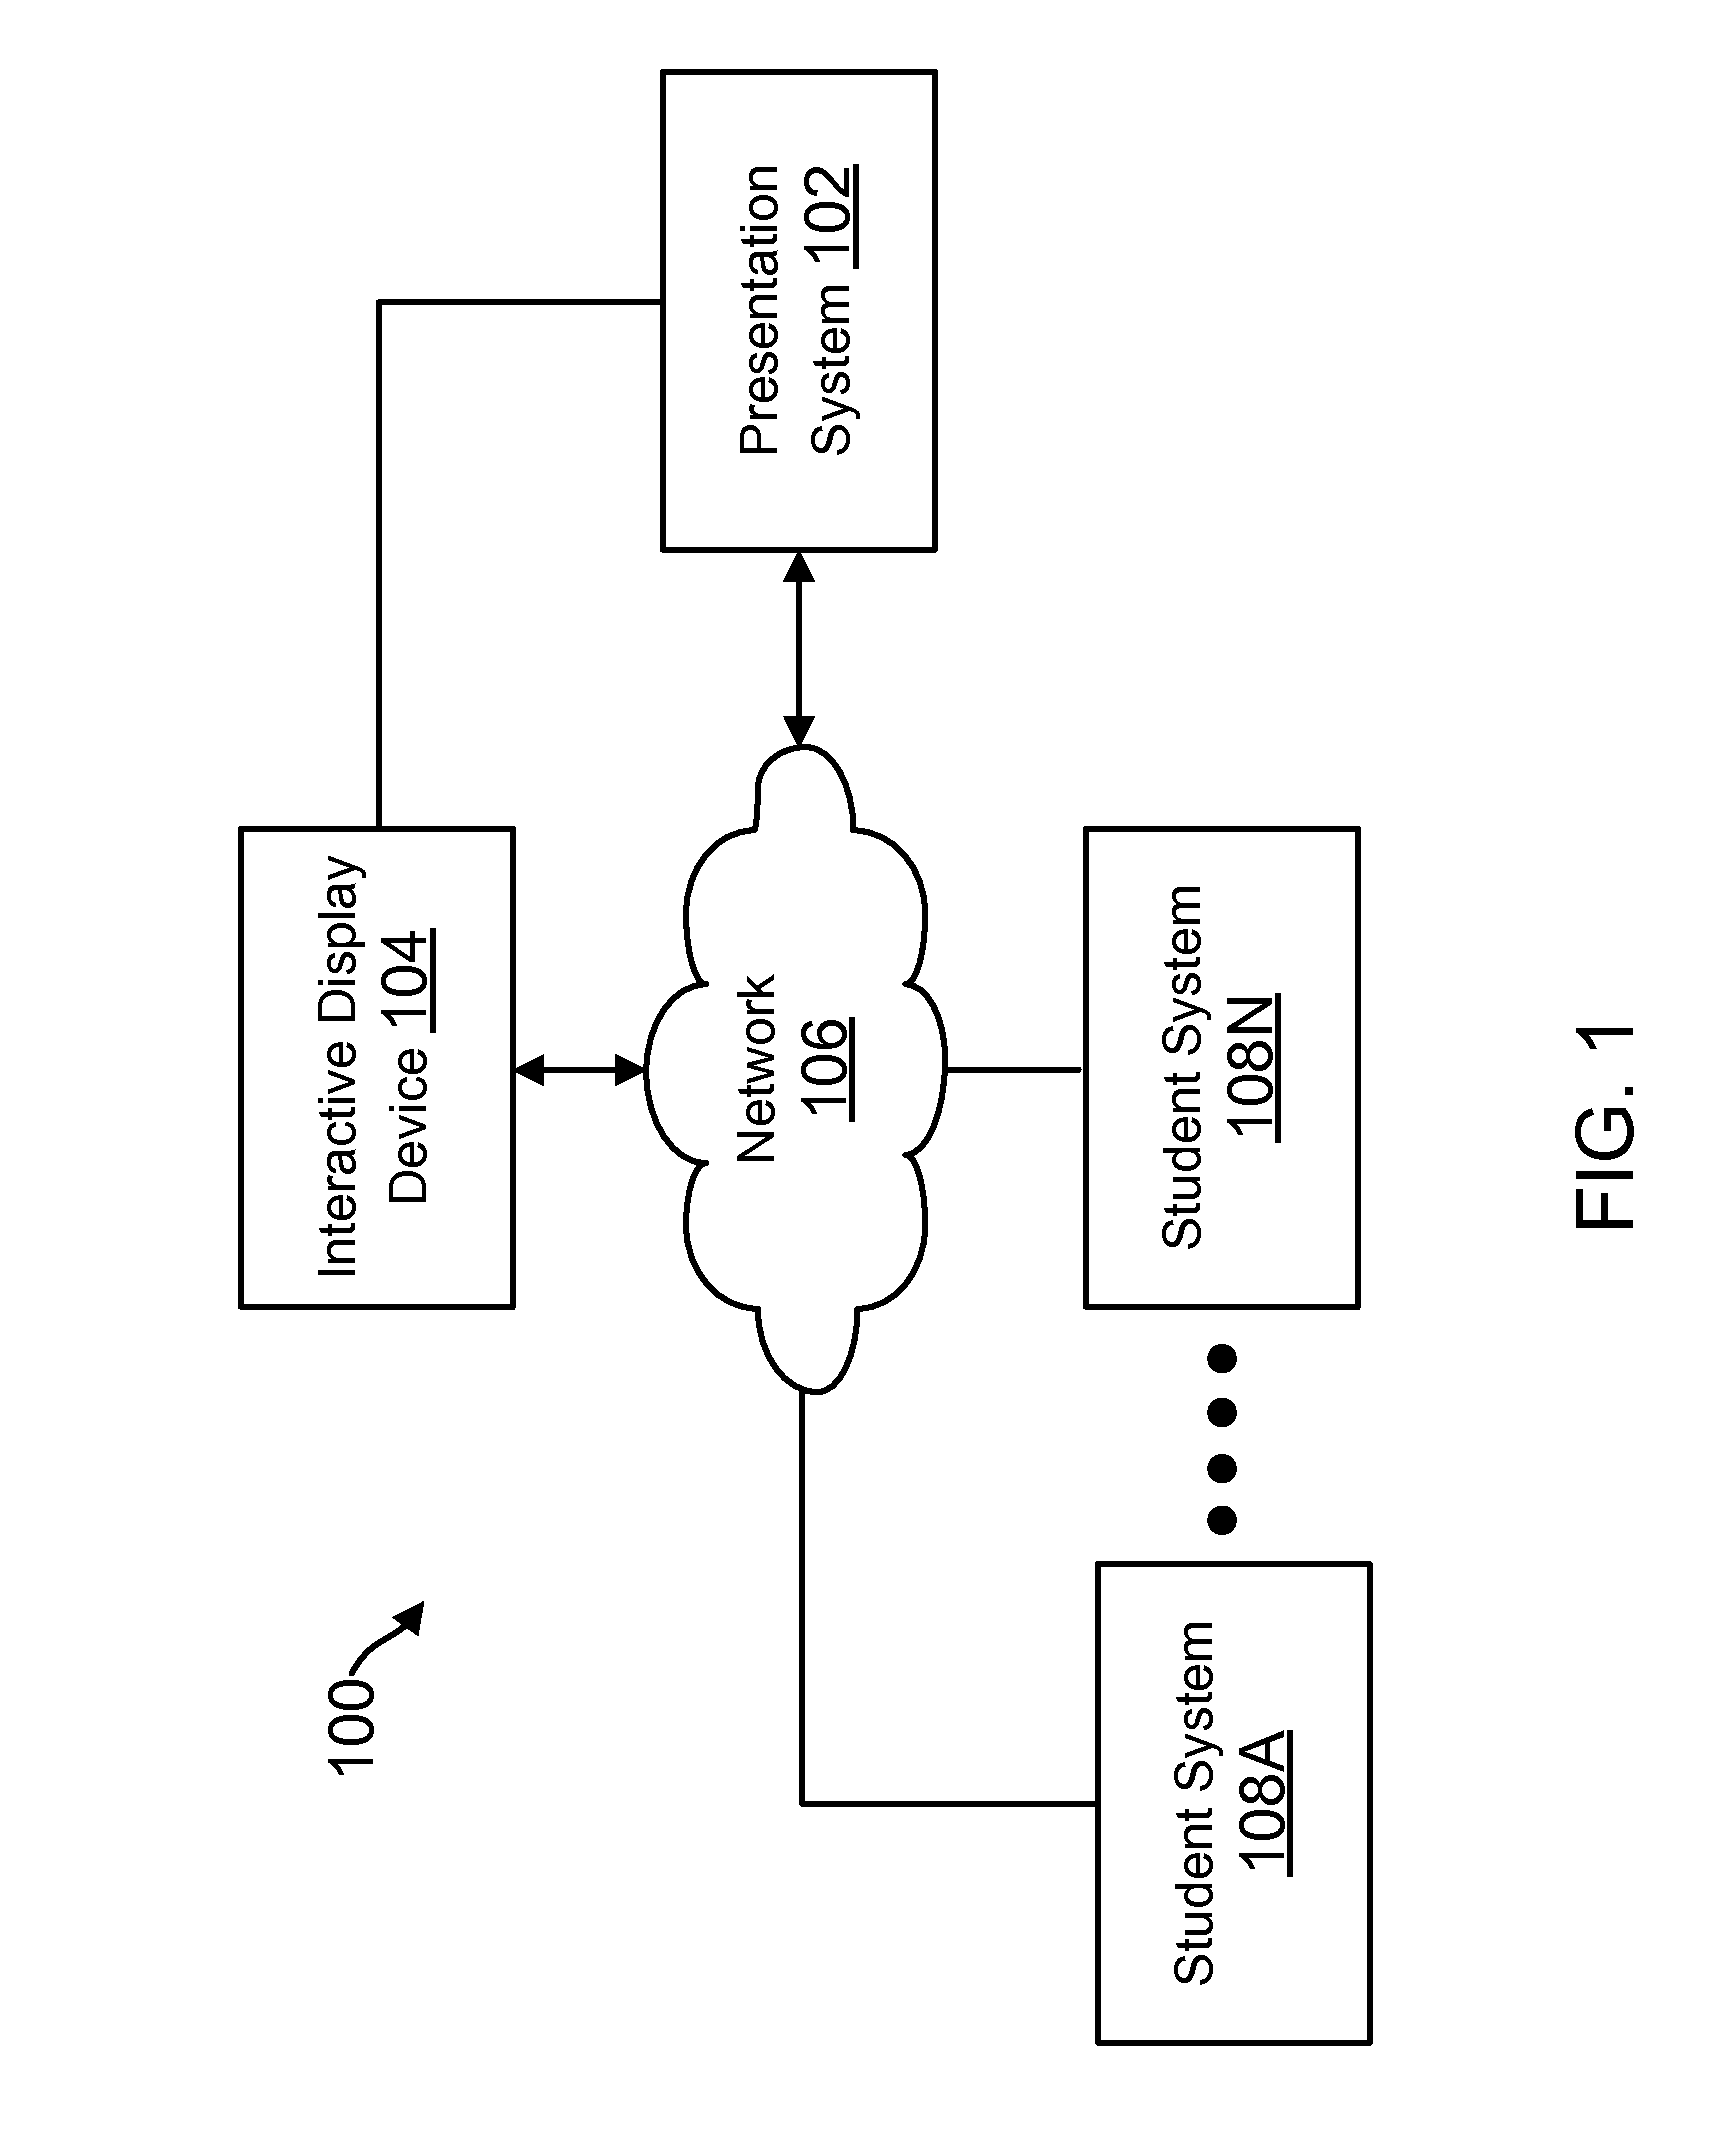 Method and system for presenting educational material